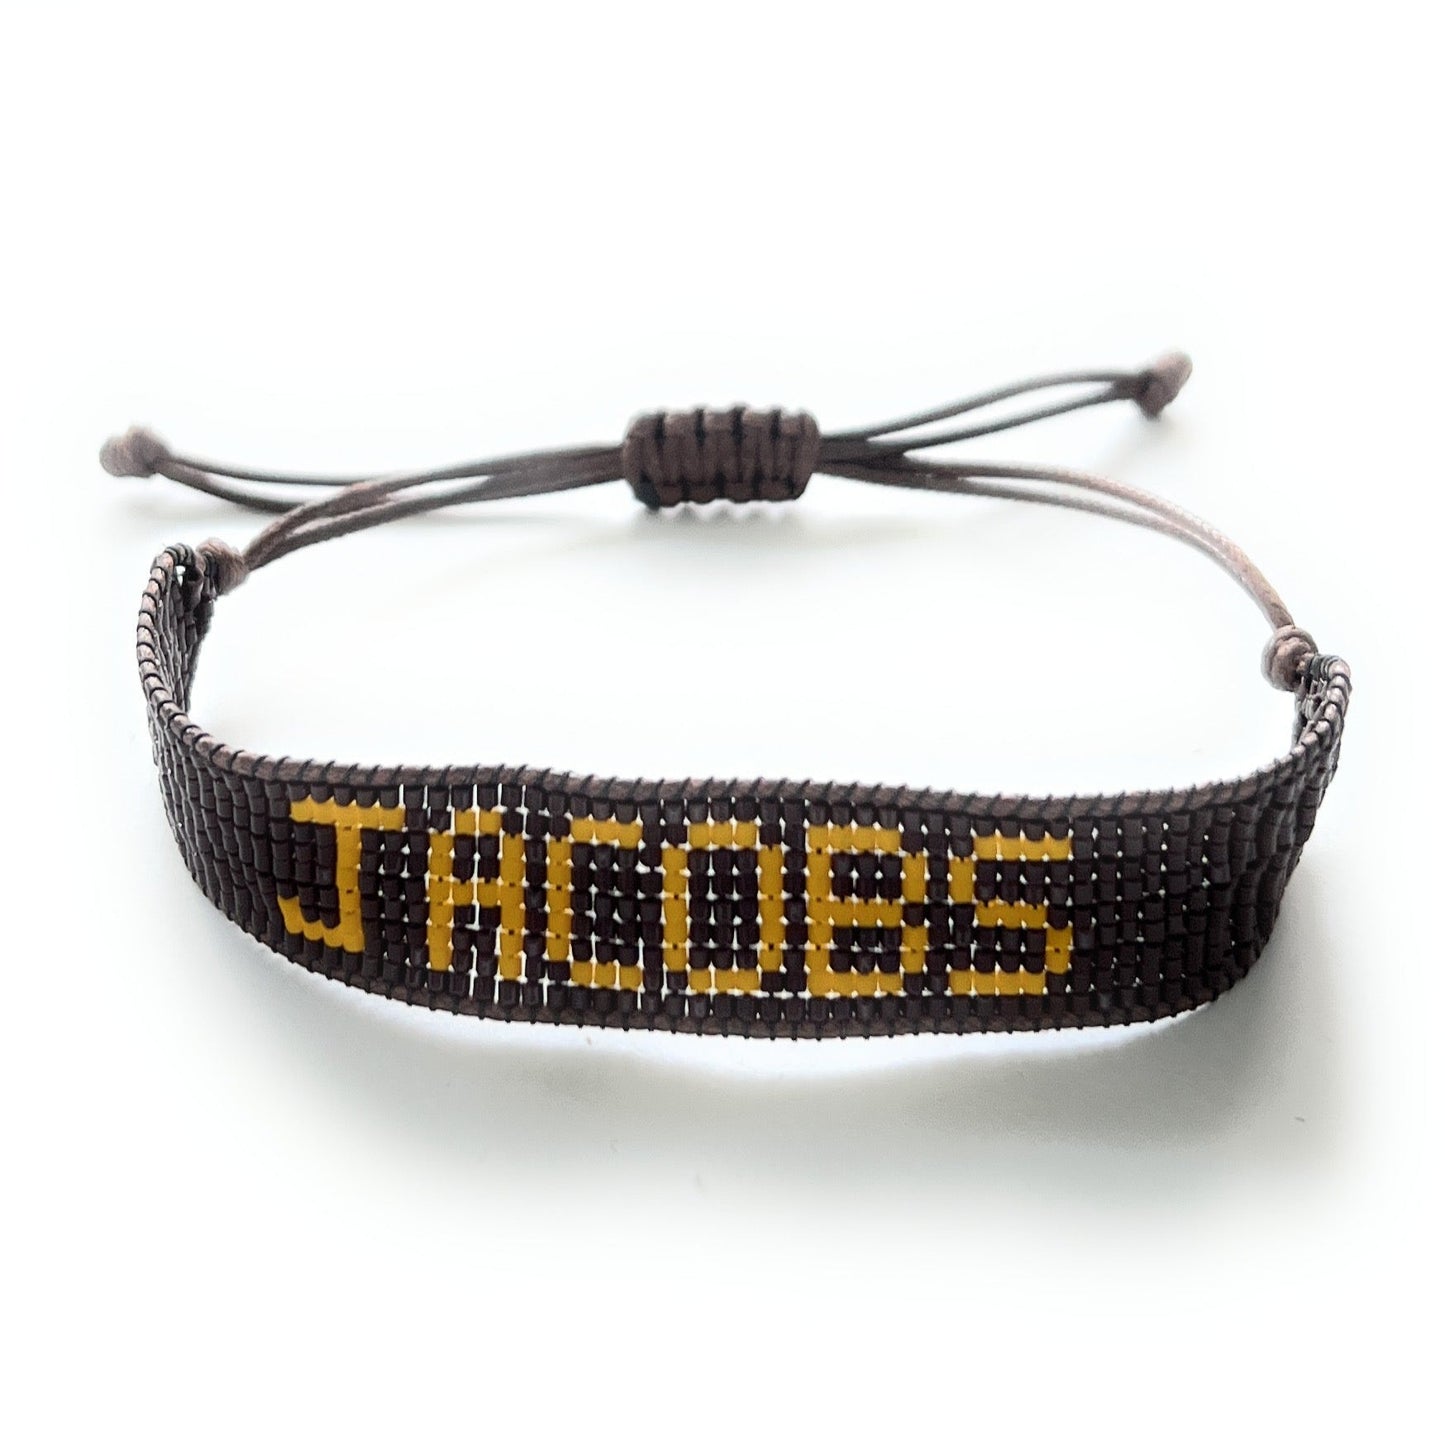 Jacobs Hand Beaded Bracelet with Adjustable Straps